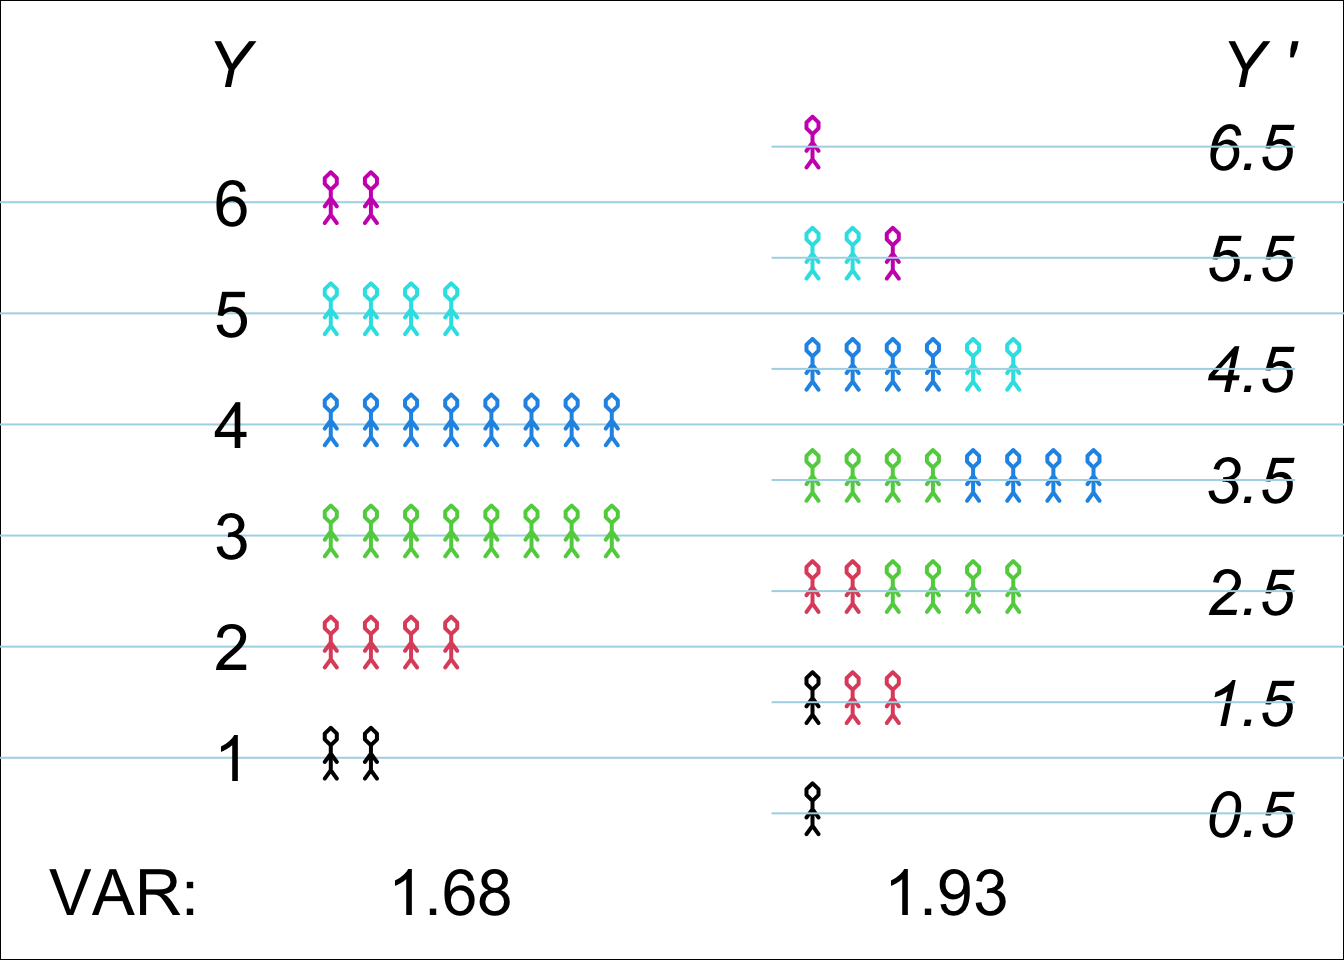 Random Measurement Error (E) added to a Random Variable. On the left is the distribution of a Random Variable Y, with each stickfigure representing a very large number of individuals. On the right is the distribution of the Random Variable Y', where Y' = Y + E, and E is independent of Y, and has a 2-point distribution, namely -0.5 and +0.5, with equal probabilities. (Here, the provenance/origin of each Y' value is shown by its colour, but in practice we would not have that luxury of knowing what the 'true' [errorless] value was). This is the variation we get to observe/measure. Of the variance of 1.93, some  1.68 of it is 'real'/'genuine', and the remainder, 0.25 is measurement error. The genuine variance of interest, 1.68, expressed as a proportion of the observable variance 1.93, namely 1.68/(1.68 + 0.25) = 0.87 or 87%. The proportion that is real is called the INTRA-CLASS CORRELATION (ICC) or intra-class correlation coefficient, and is an important indicator of the quality of the measurement of Y.